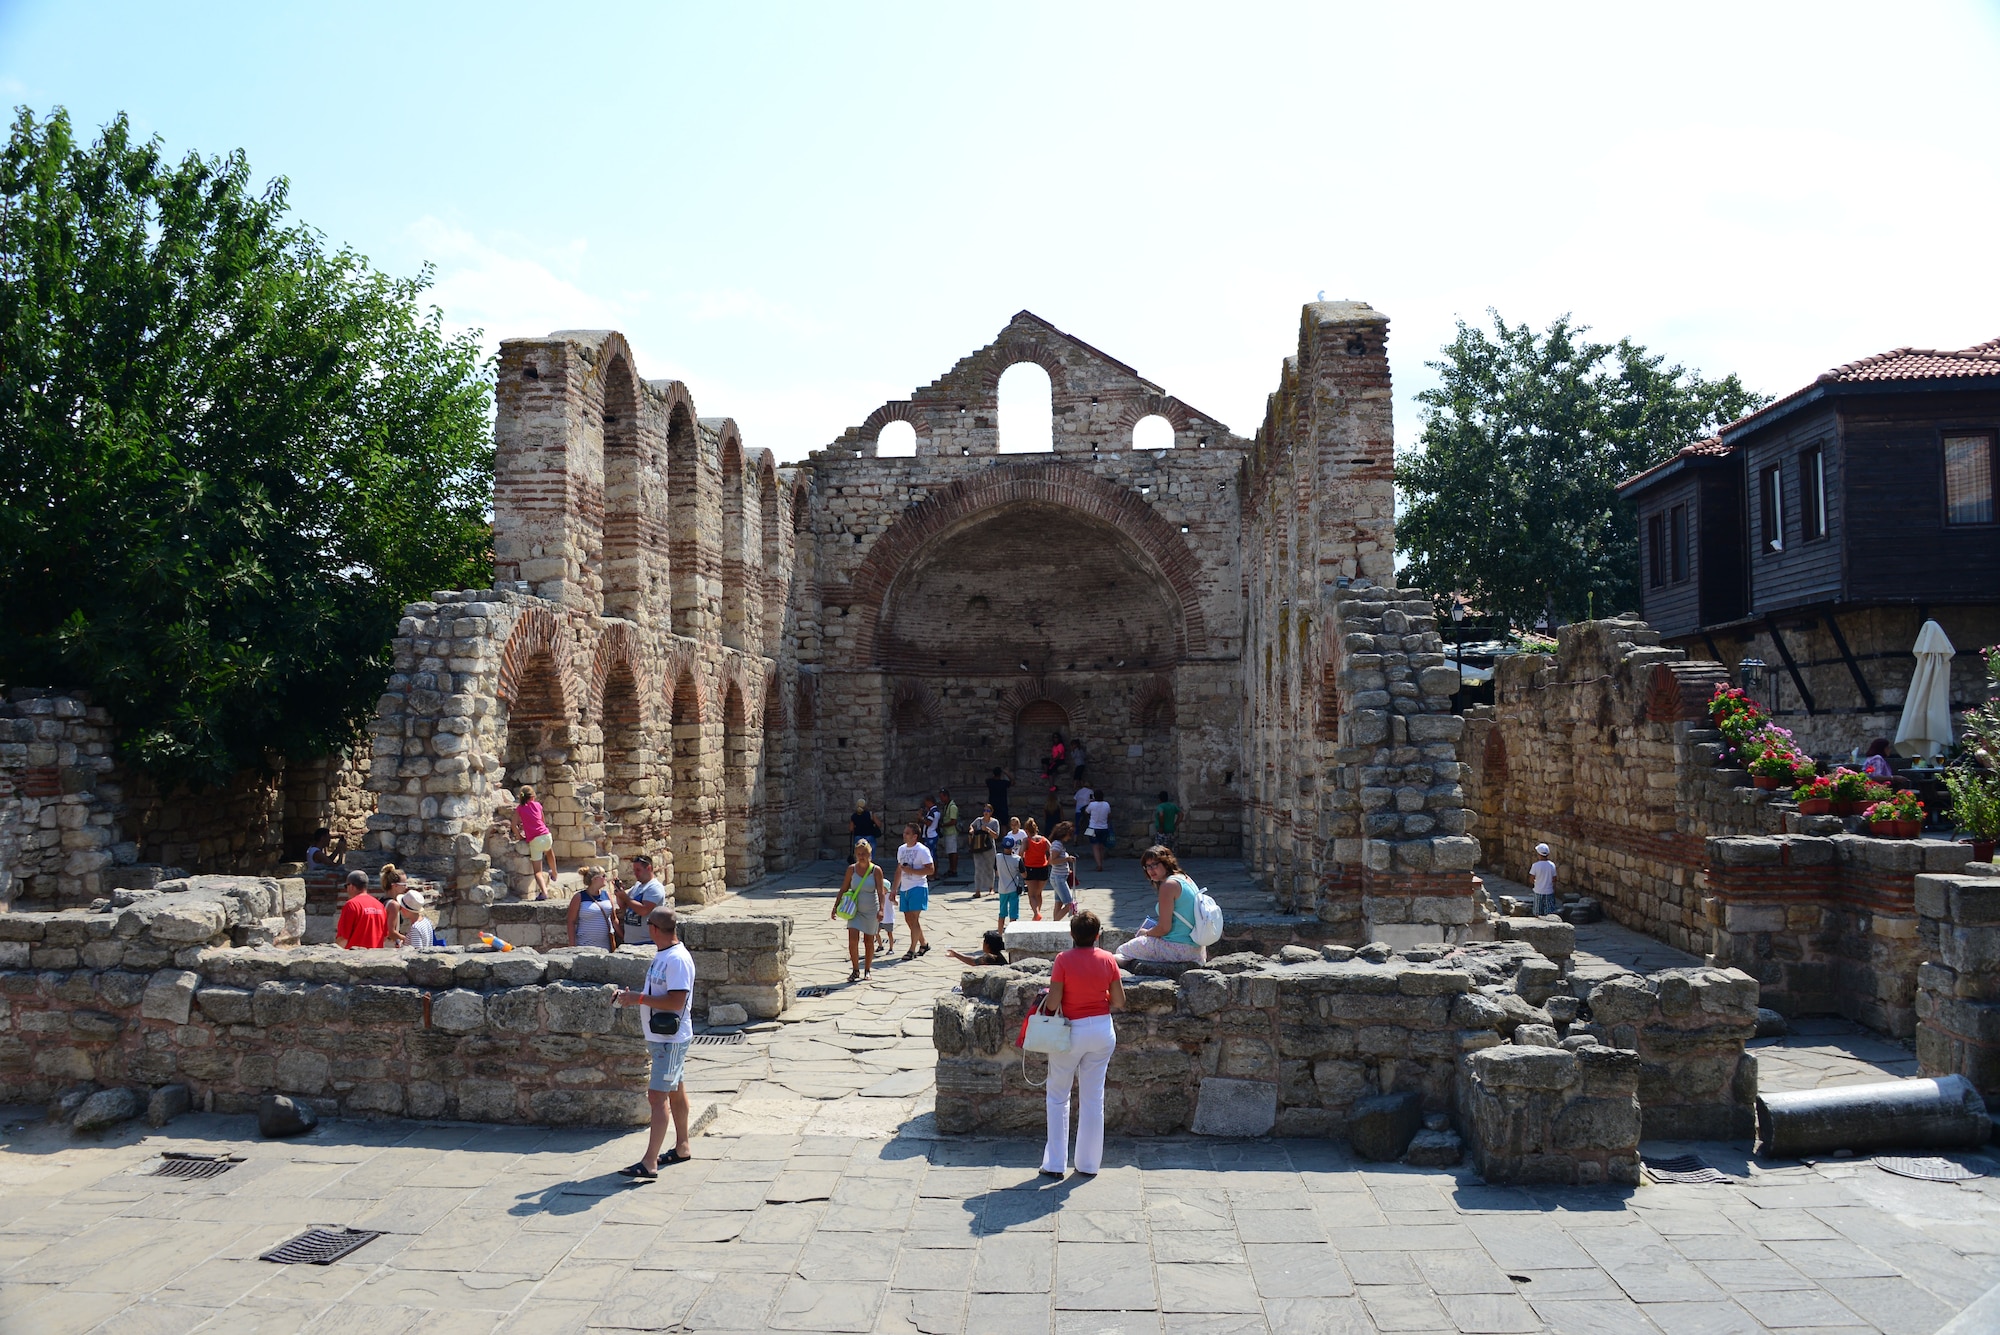 The Church of St. Sophia ruins sit on top of a hill in Nessebar, Bulgaria, an ancient settlement along the Black Sea.  Airmen and Soldiers toured the area as part of a  Morale Wellness and Recreation event Aug. 12., 2016 while deployed to Novo Selo Training Area, Bulgaria.  Tennessee National Guard Soldiers and Airmen were on rotations as part of Operation Resolute Castle 16, an ongoing operation of military construction to build up Eastern European base infrastructure and help strengthen ties between Tennessee's state partnership with Bulgaria.  (U.S. Air National Guard photo by Master Sgt. Kendra M. Owenby, 134 ARW Public Affairs)